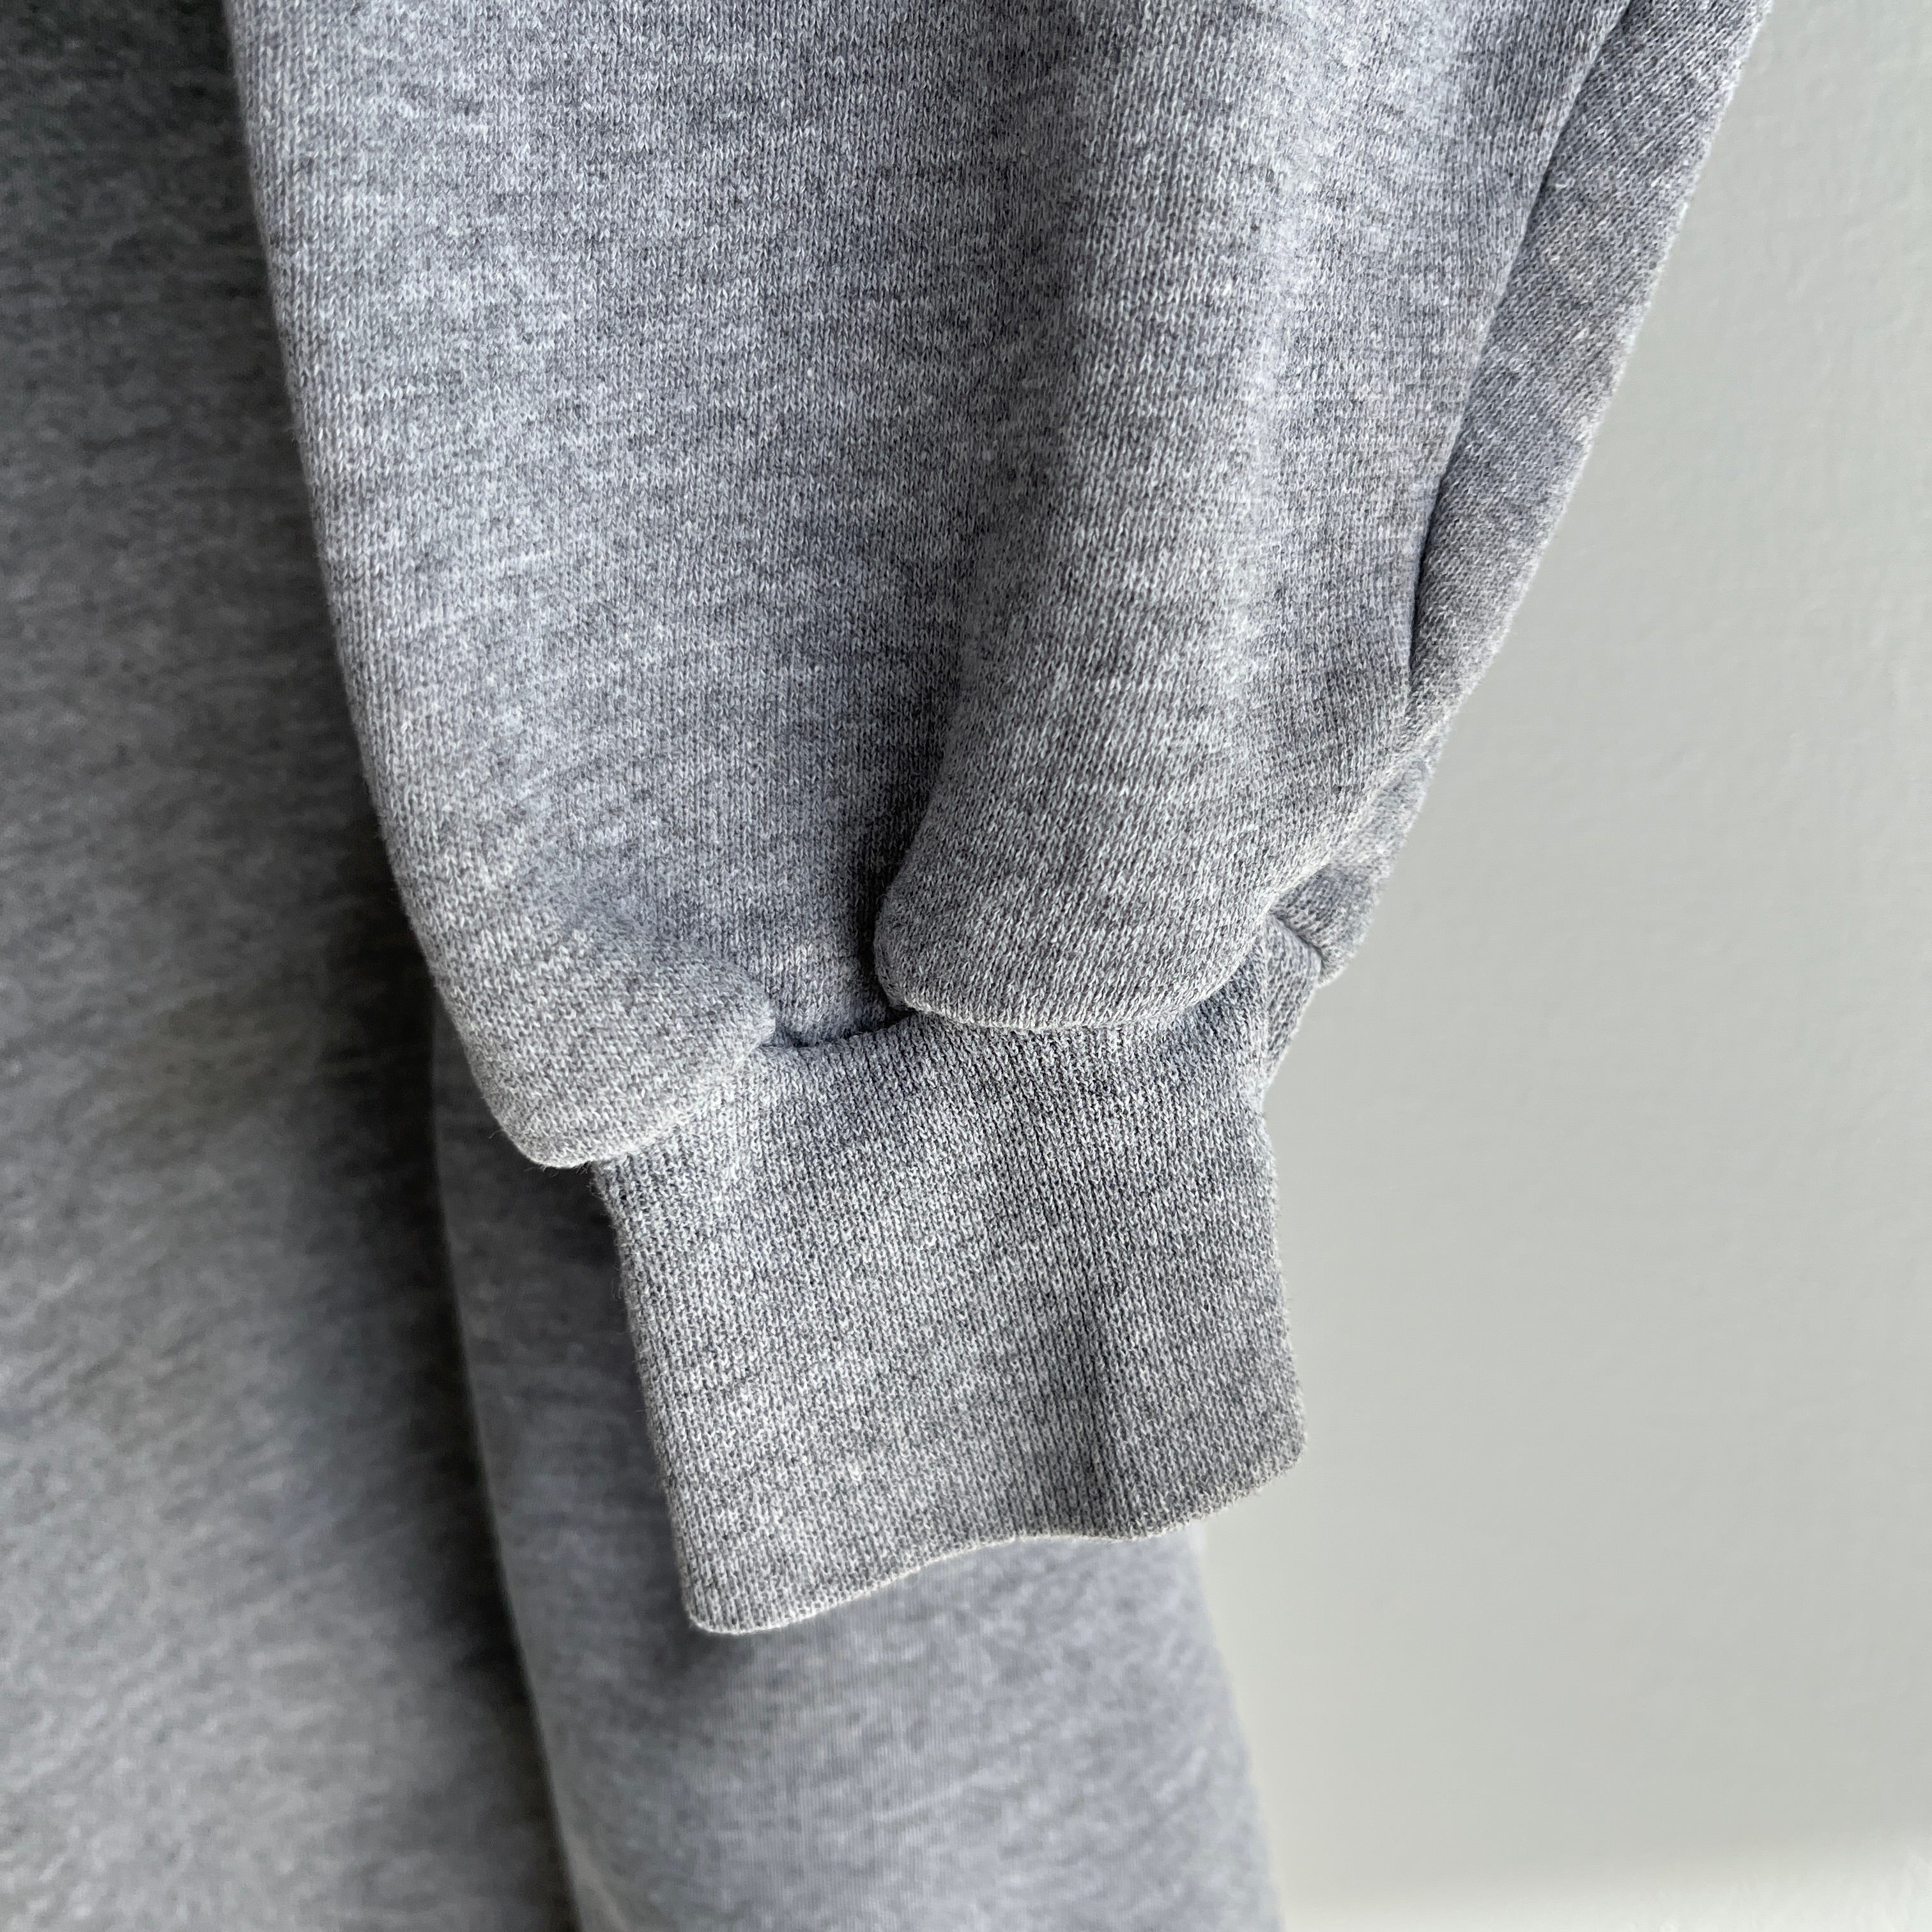 1990s/2000s Single V Russell Brand Relaxed Fit Deep Gray Sweatshirt